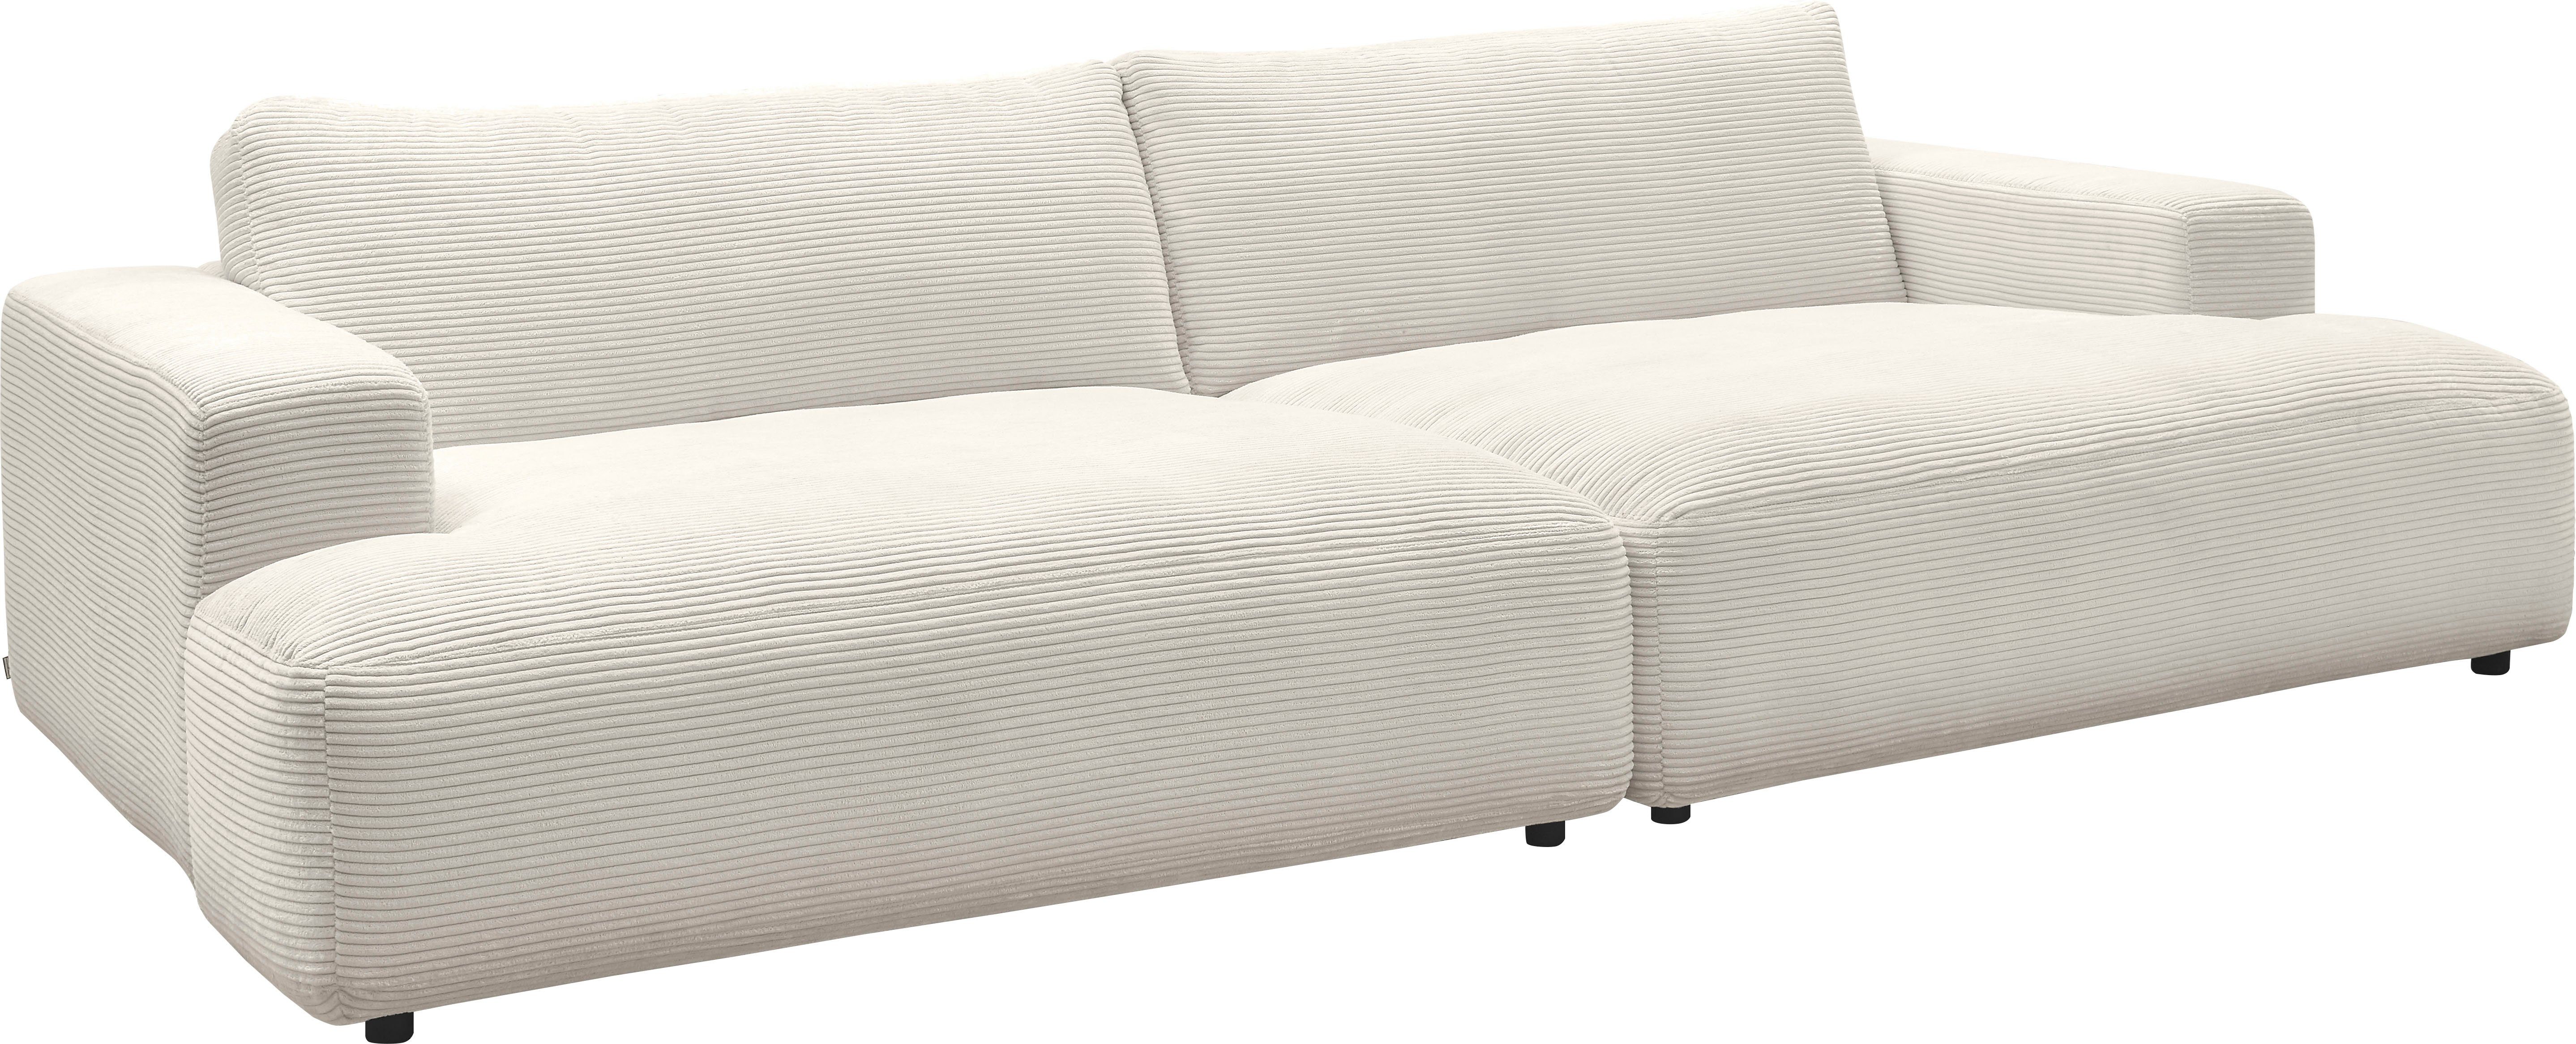 Loungesofa cm Musterring snow M Cord-Bezug, by GALLERY Breite branded Lucia, 292